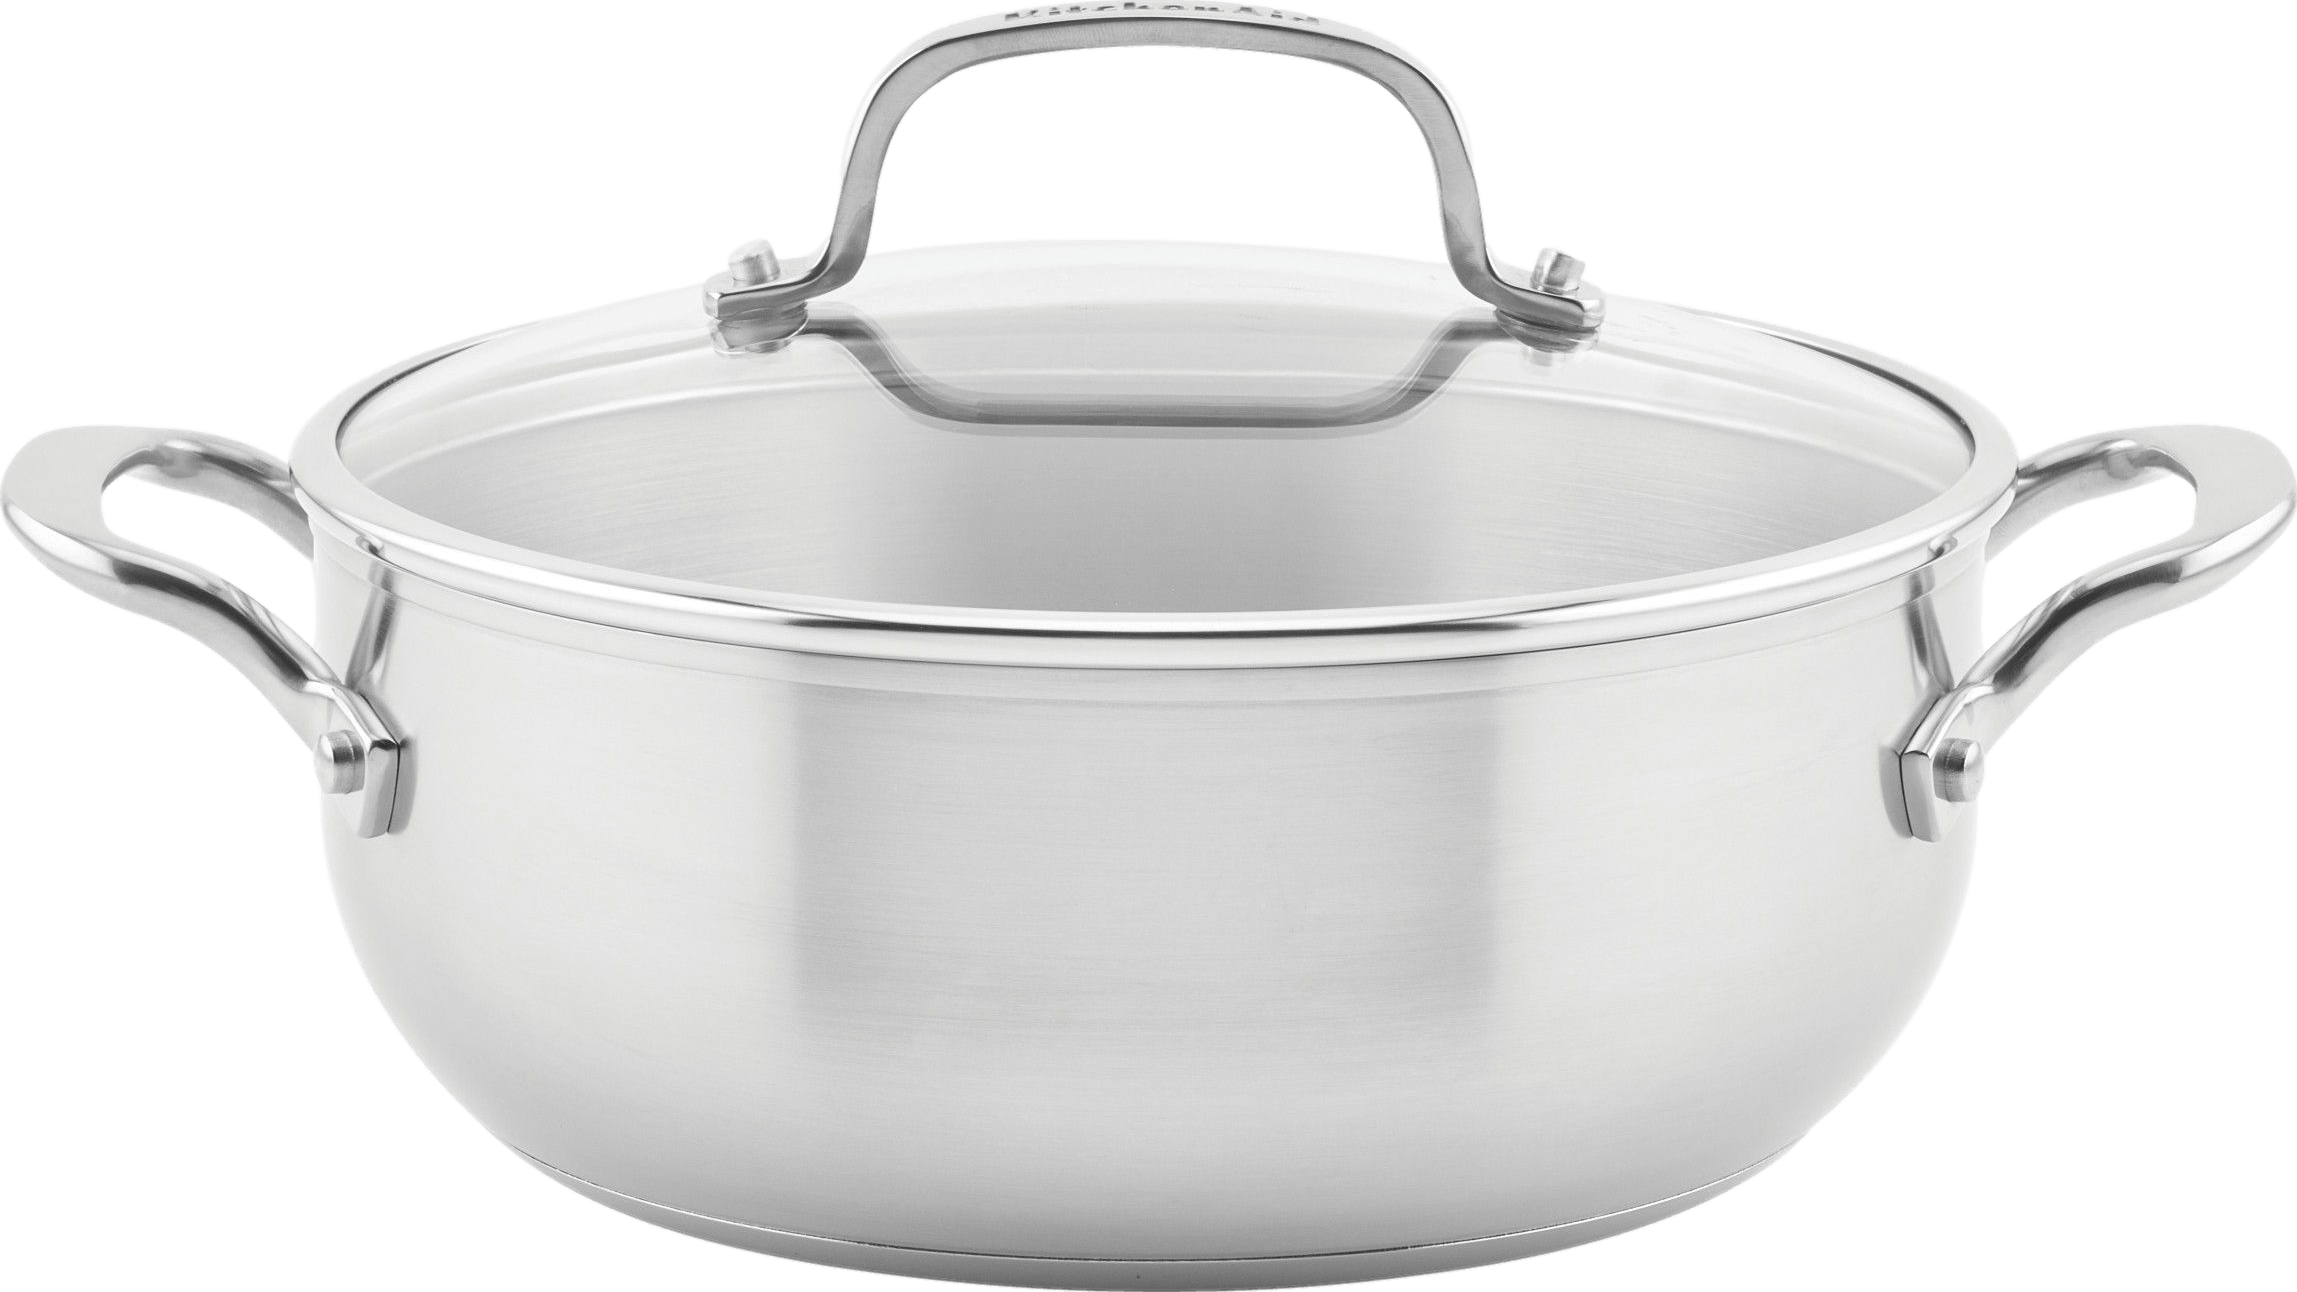 KitchenAid 3-Ply Base Stainless Steel Induction Casserole with Lid, 4-Quart, Brushed Stainless Steel